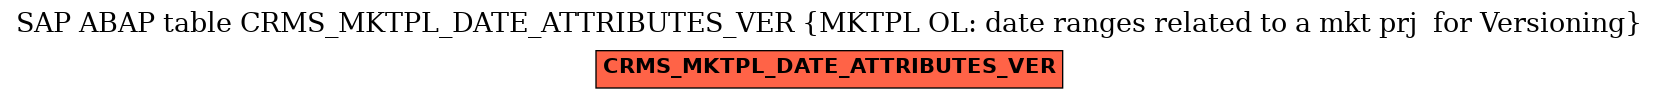 E-R Diagram for table CRMS_MKTPL_DATE_ATTRIBUTES_VER (MKTPL OL: date ranges related to a mkt prj  for Versioning)